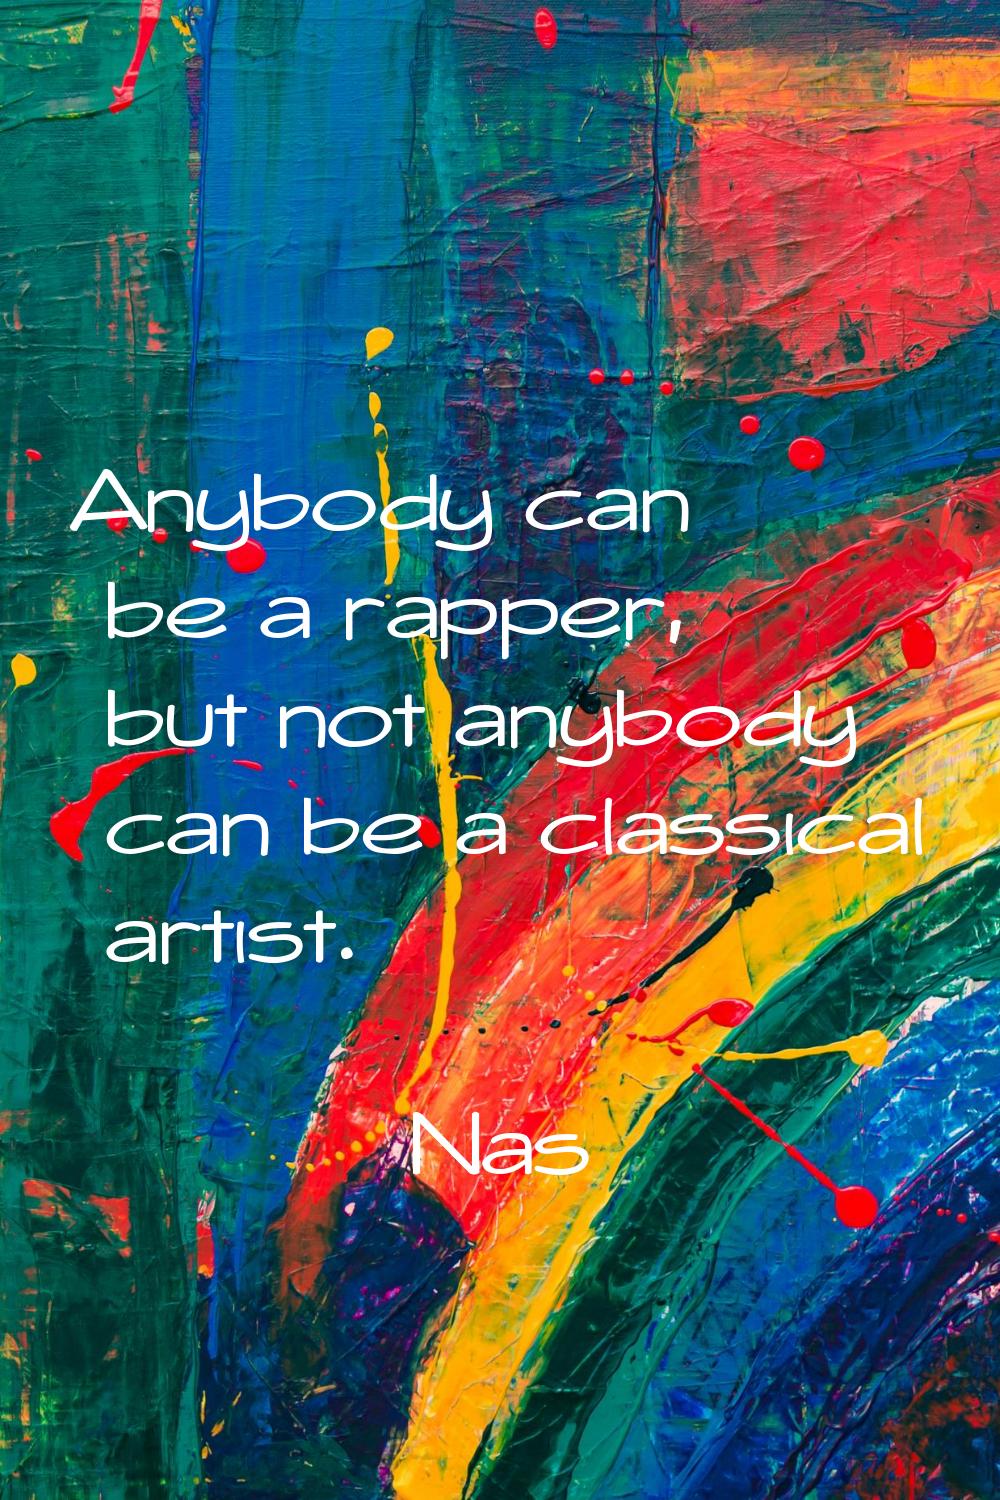 Anybody can be a rapper, but not anybody can be a classical artist.